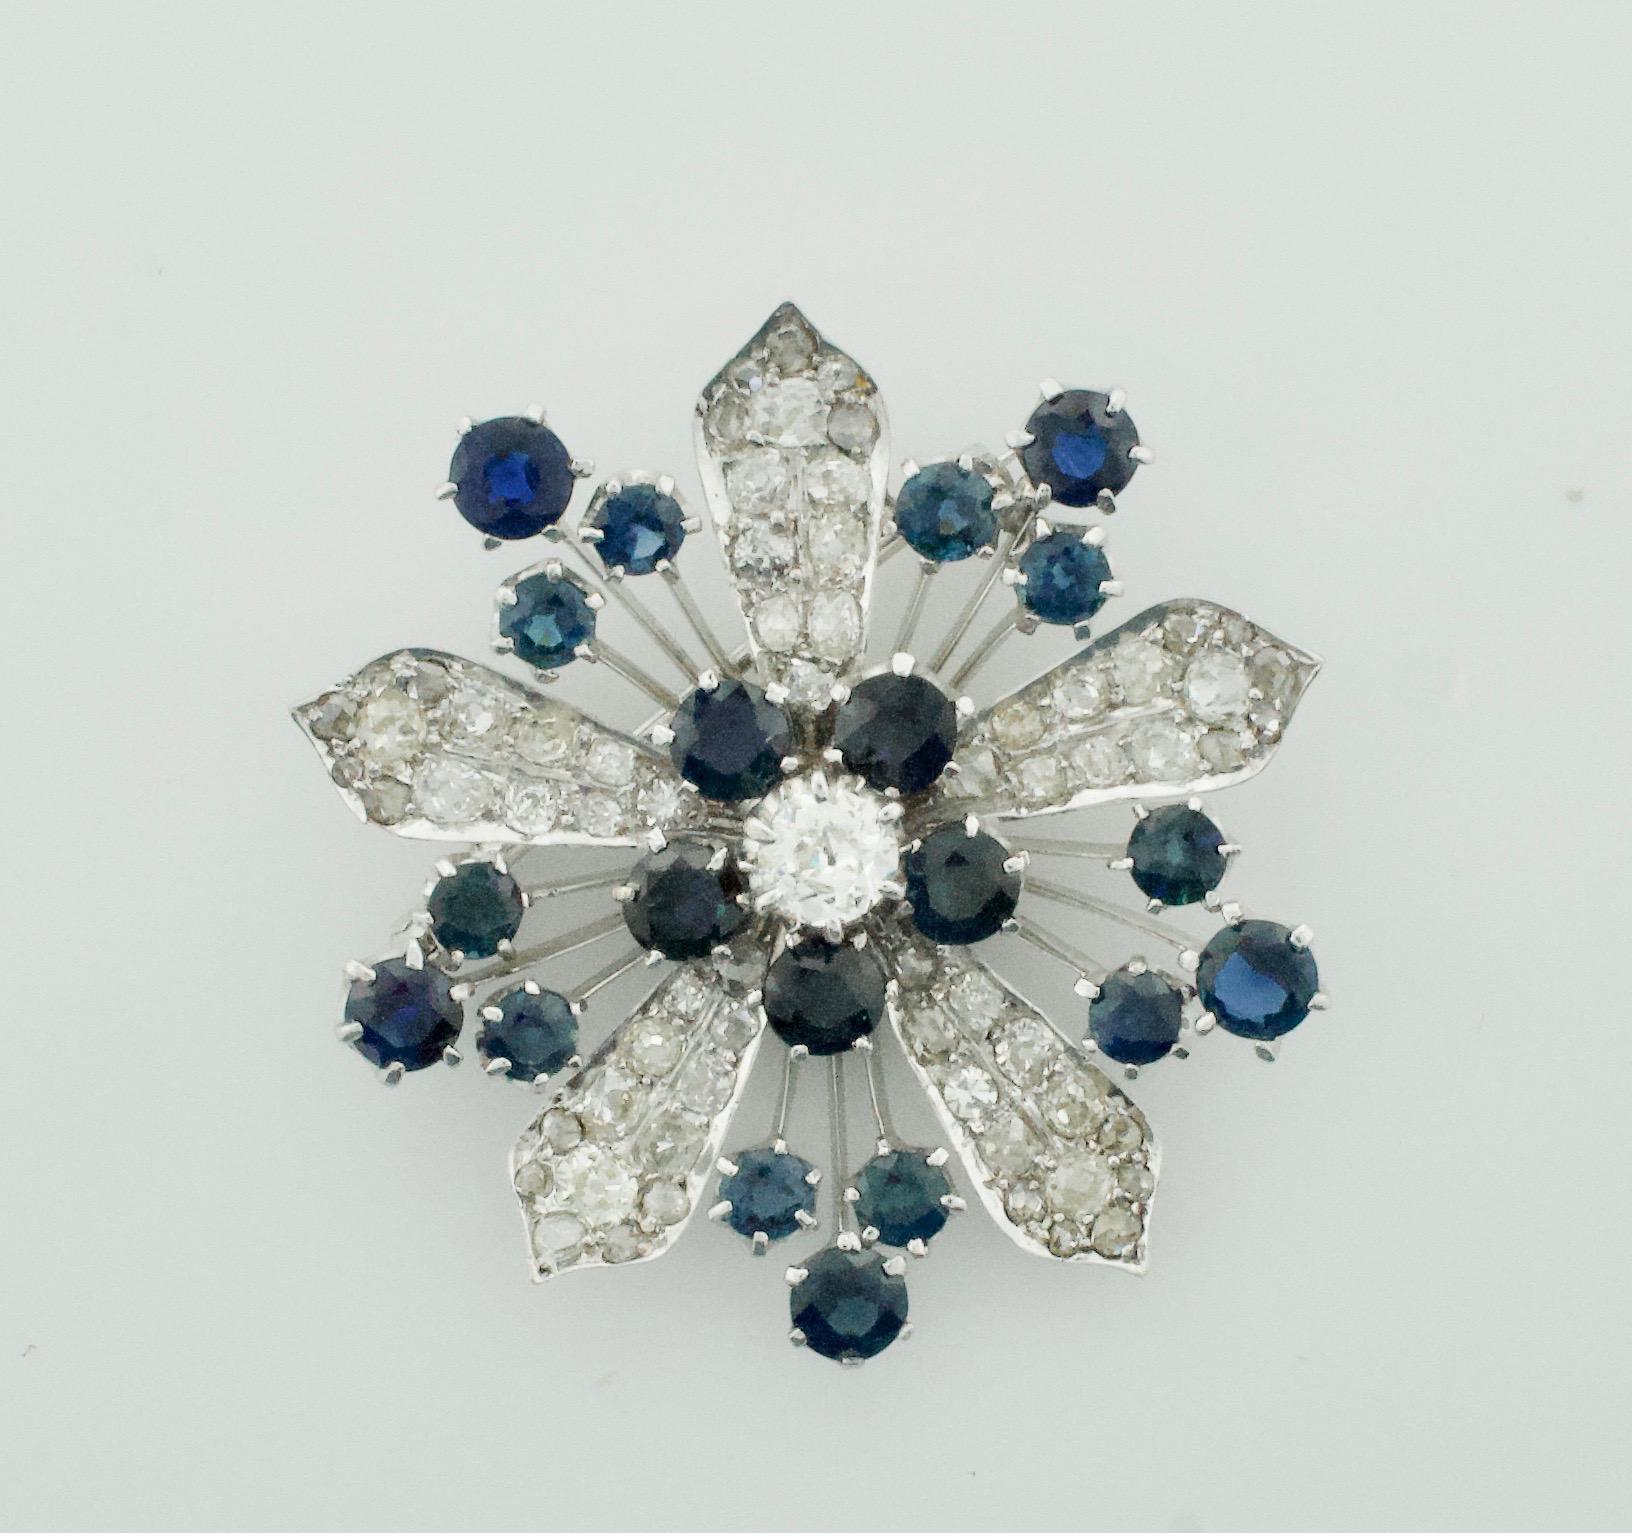 Platinum Diamond and Sapphire Brooch - Necklace Circa 1920's 6.85 carats.
One Old European Cut Diamond weighing .65 carats approximately [GHI - SI]  [bright with no imperfections visible to the naked eye]
Thirty Five Round Cut Diamonds weighing 5.50